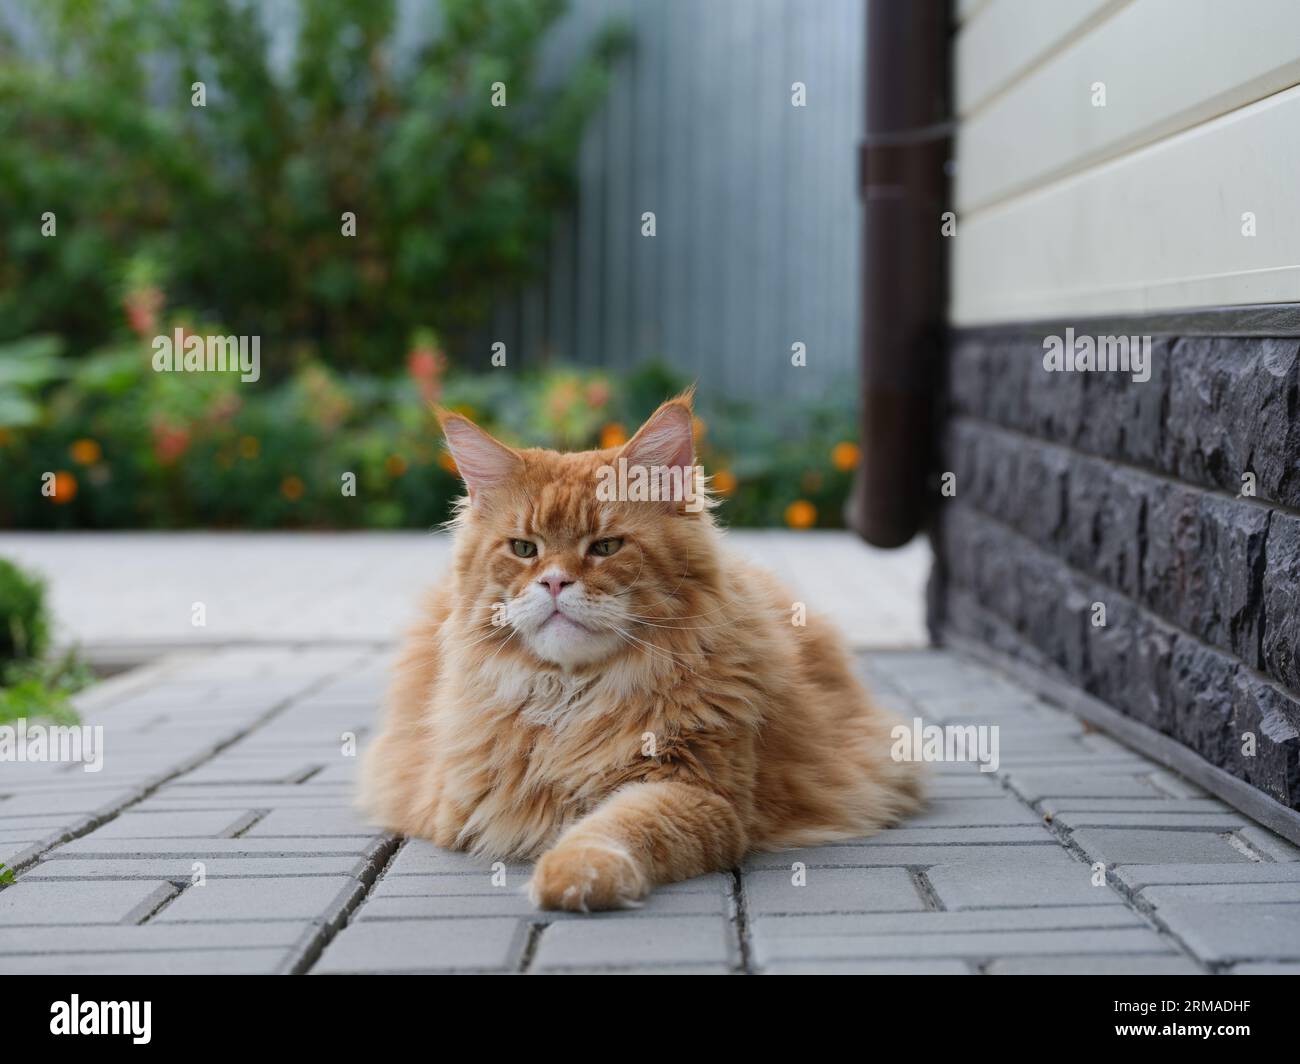 A red Maine Coon cat sitting on tiles in a garden. Close up. Stock Photo